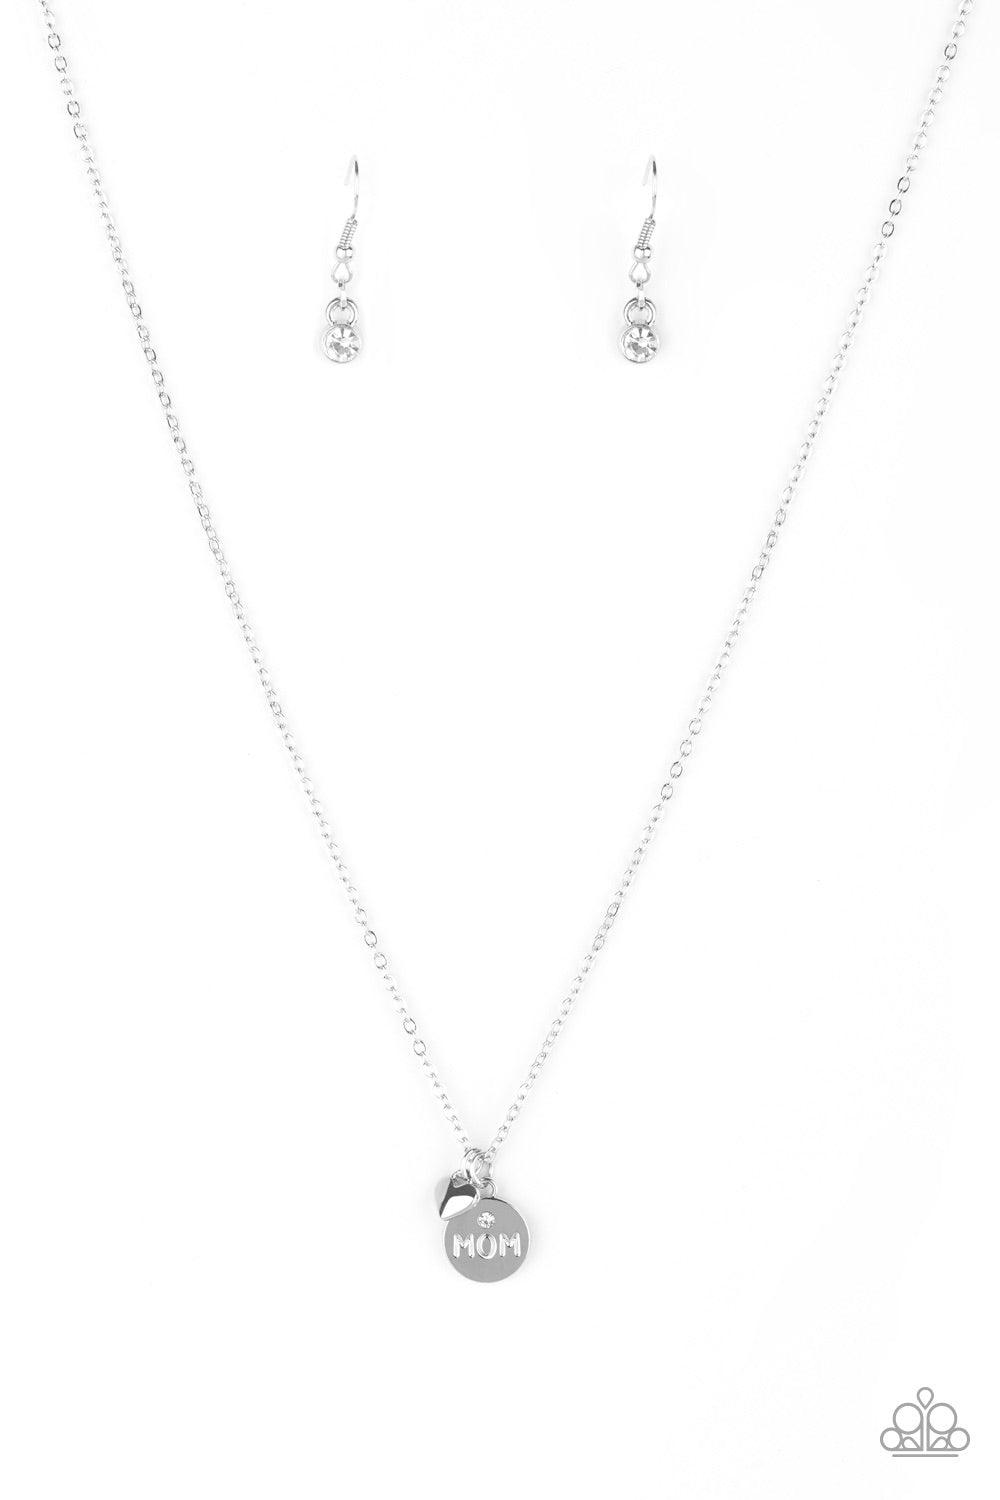 Paparazzi Accessories Worlds Best Mom - White Dotted with a dainty white rhinestone, a shimmery silver disc stamped in the word, "mom", joins a dainty silver heart below the collar for a whimsical look. Features an adjustable clasp closure. Jewelry